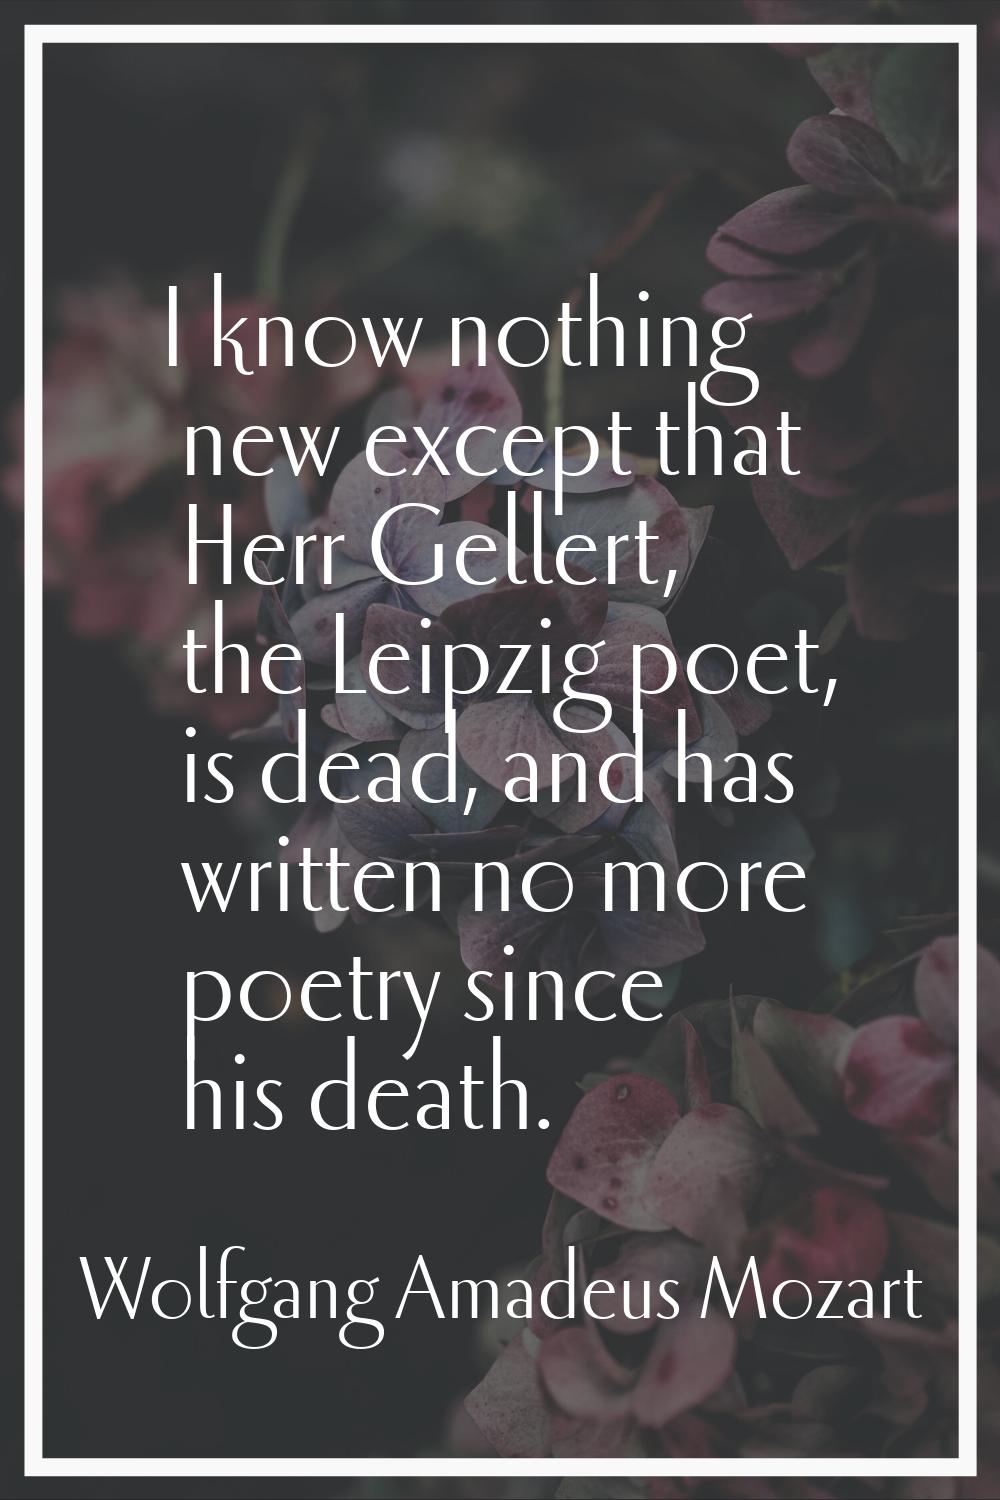 I know nothing new except that Herr Gellert, the Leipzig poet, is dead, and has written no more poe